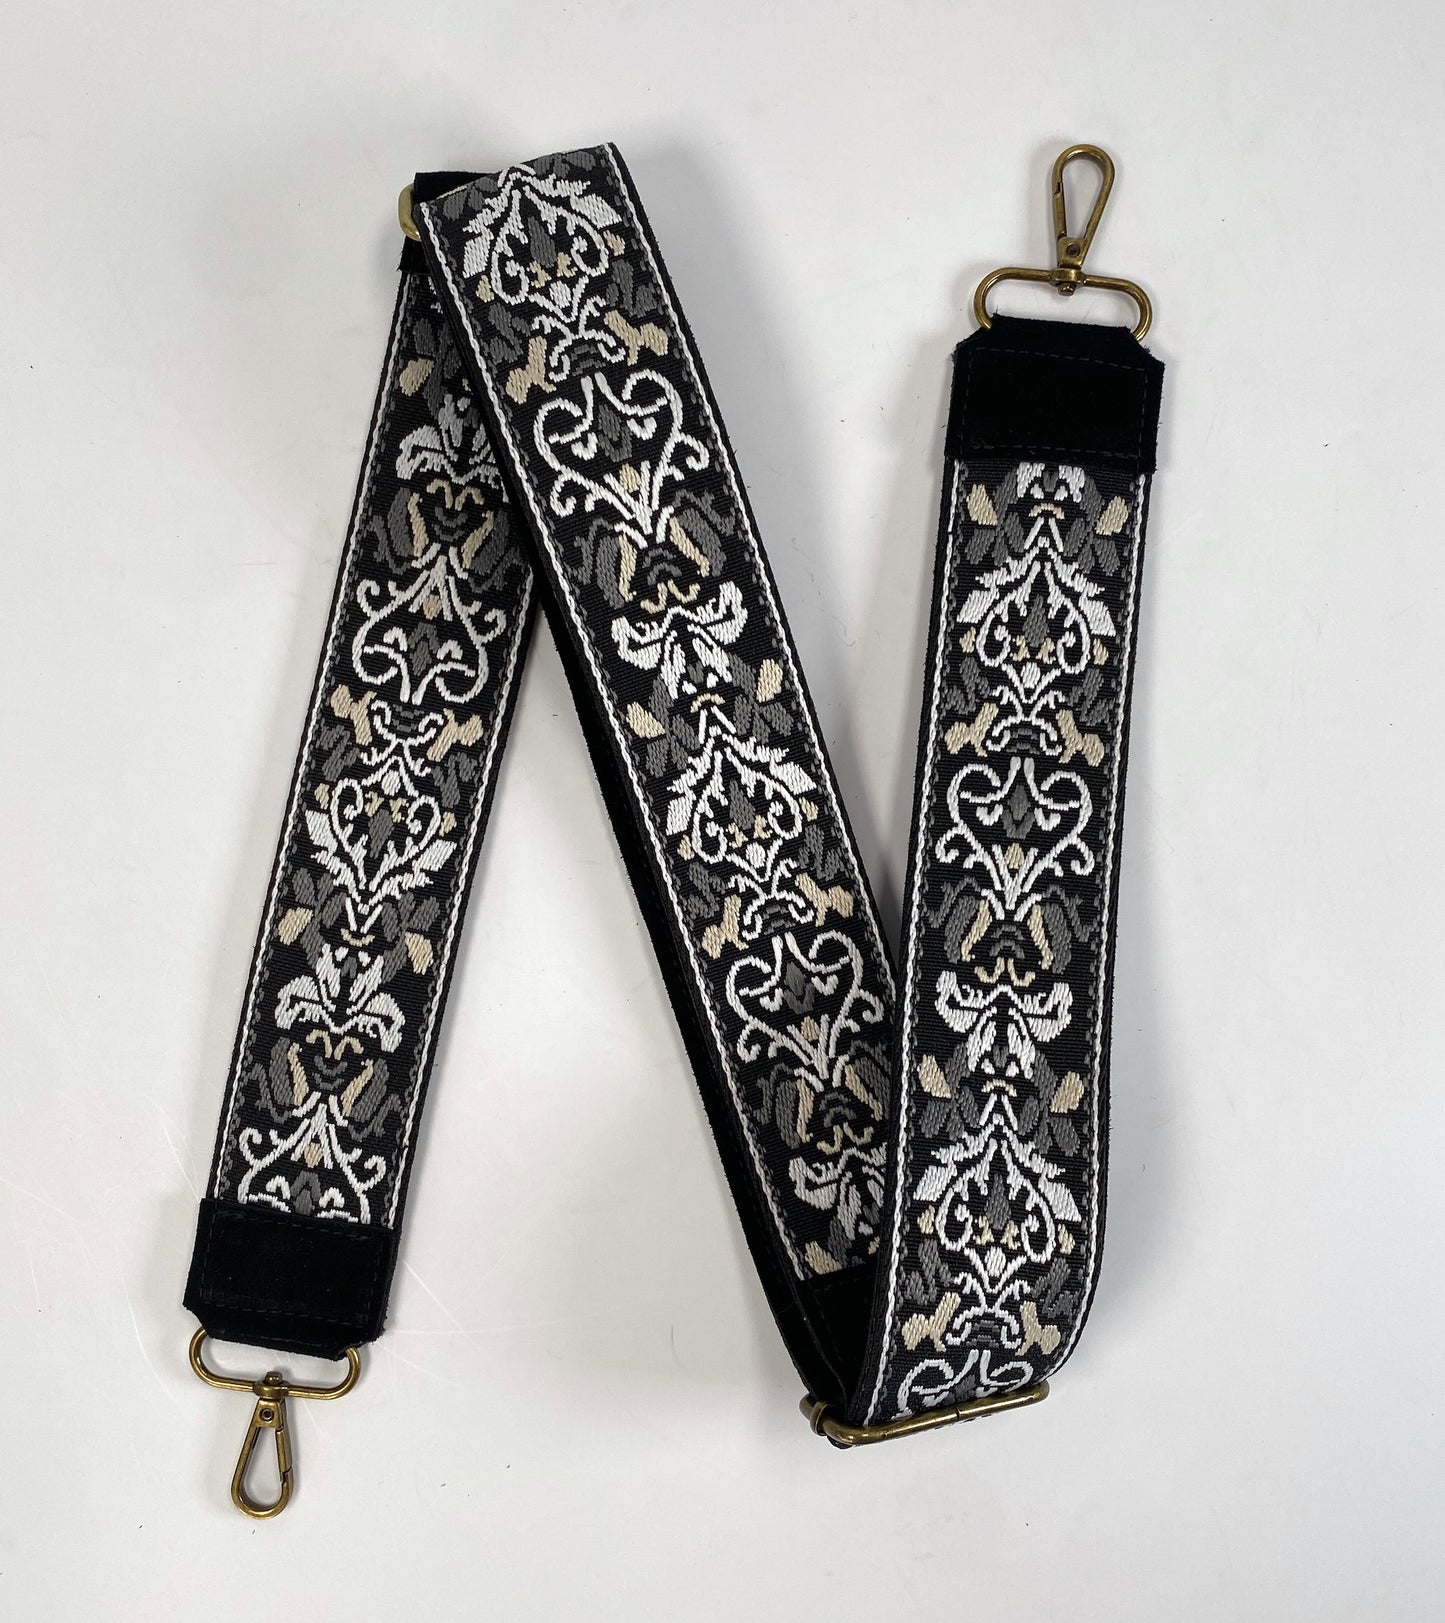 Adjustable Handbag Strap in Black with White and Tan accents